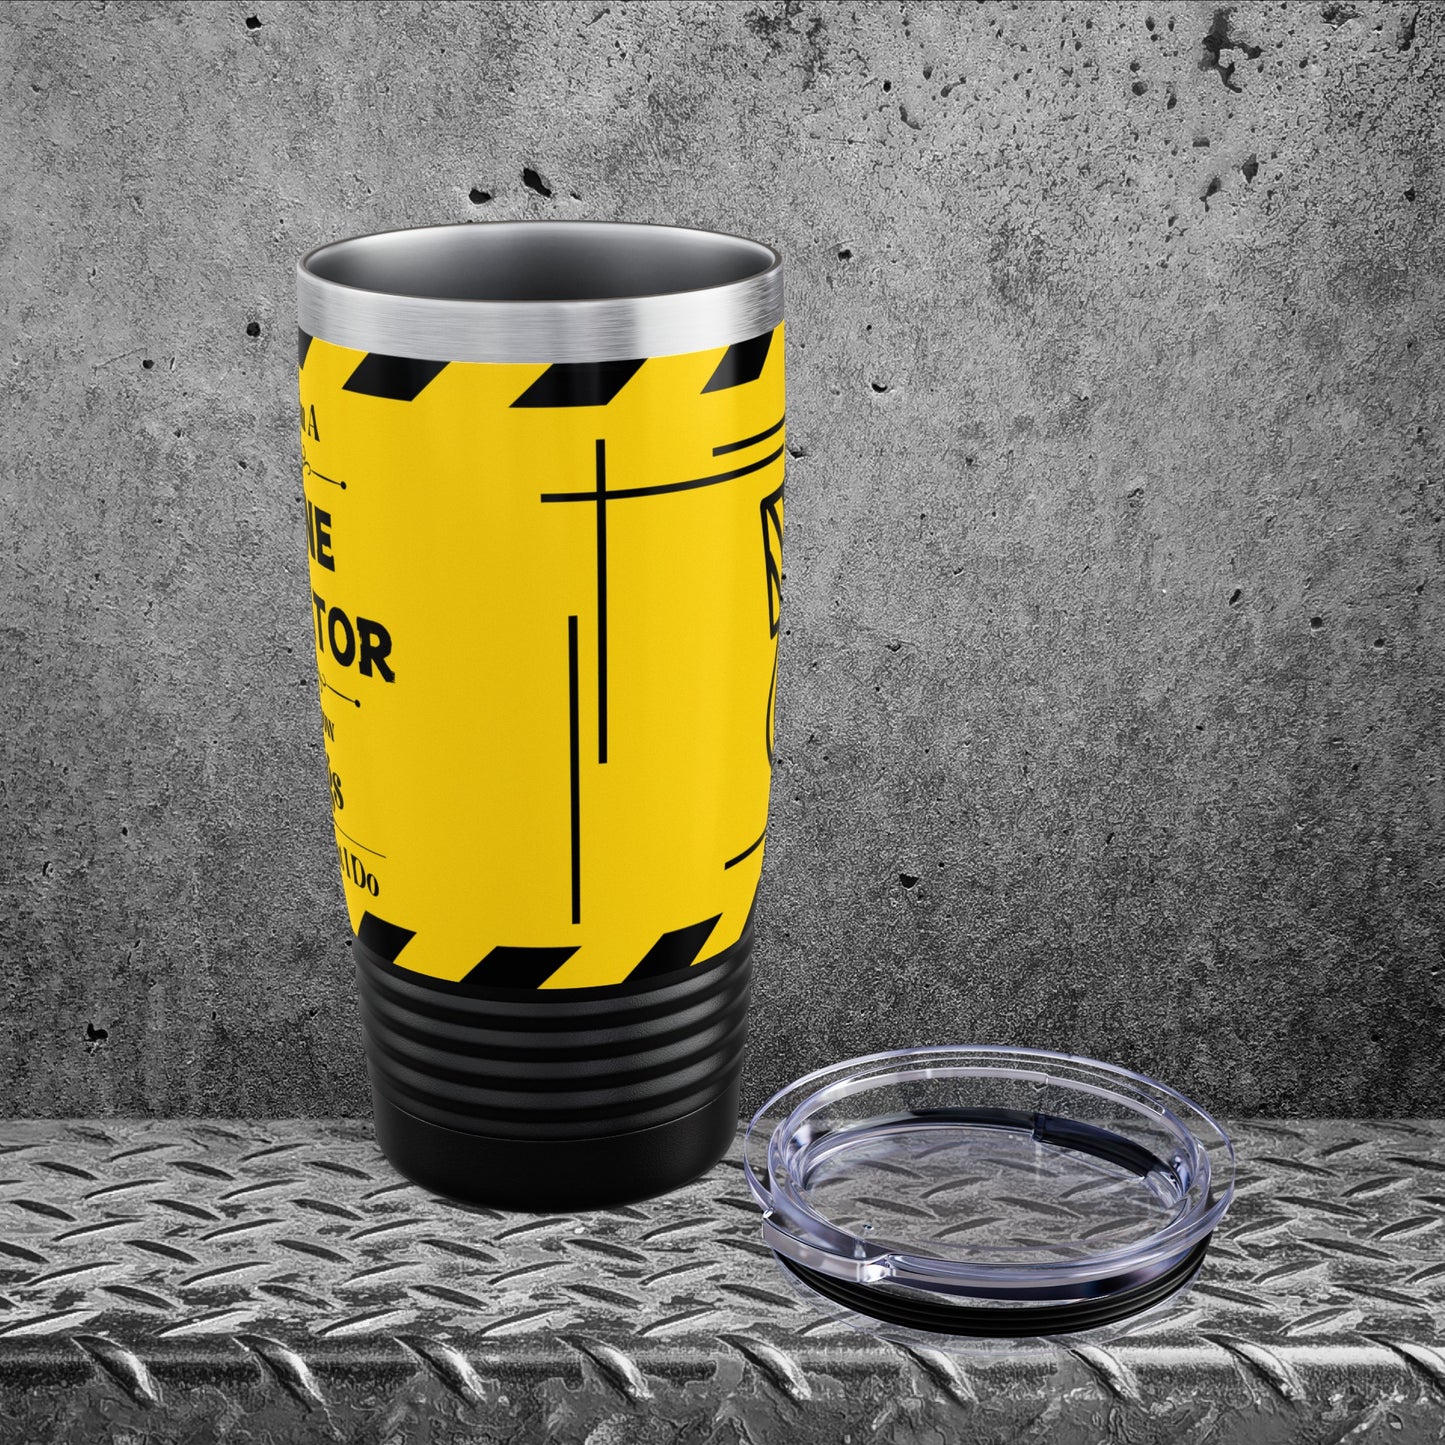 Relax, I'm A Crane Operator, And I Know Things - Ringneck Tumbler, 20oz